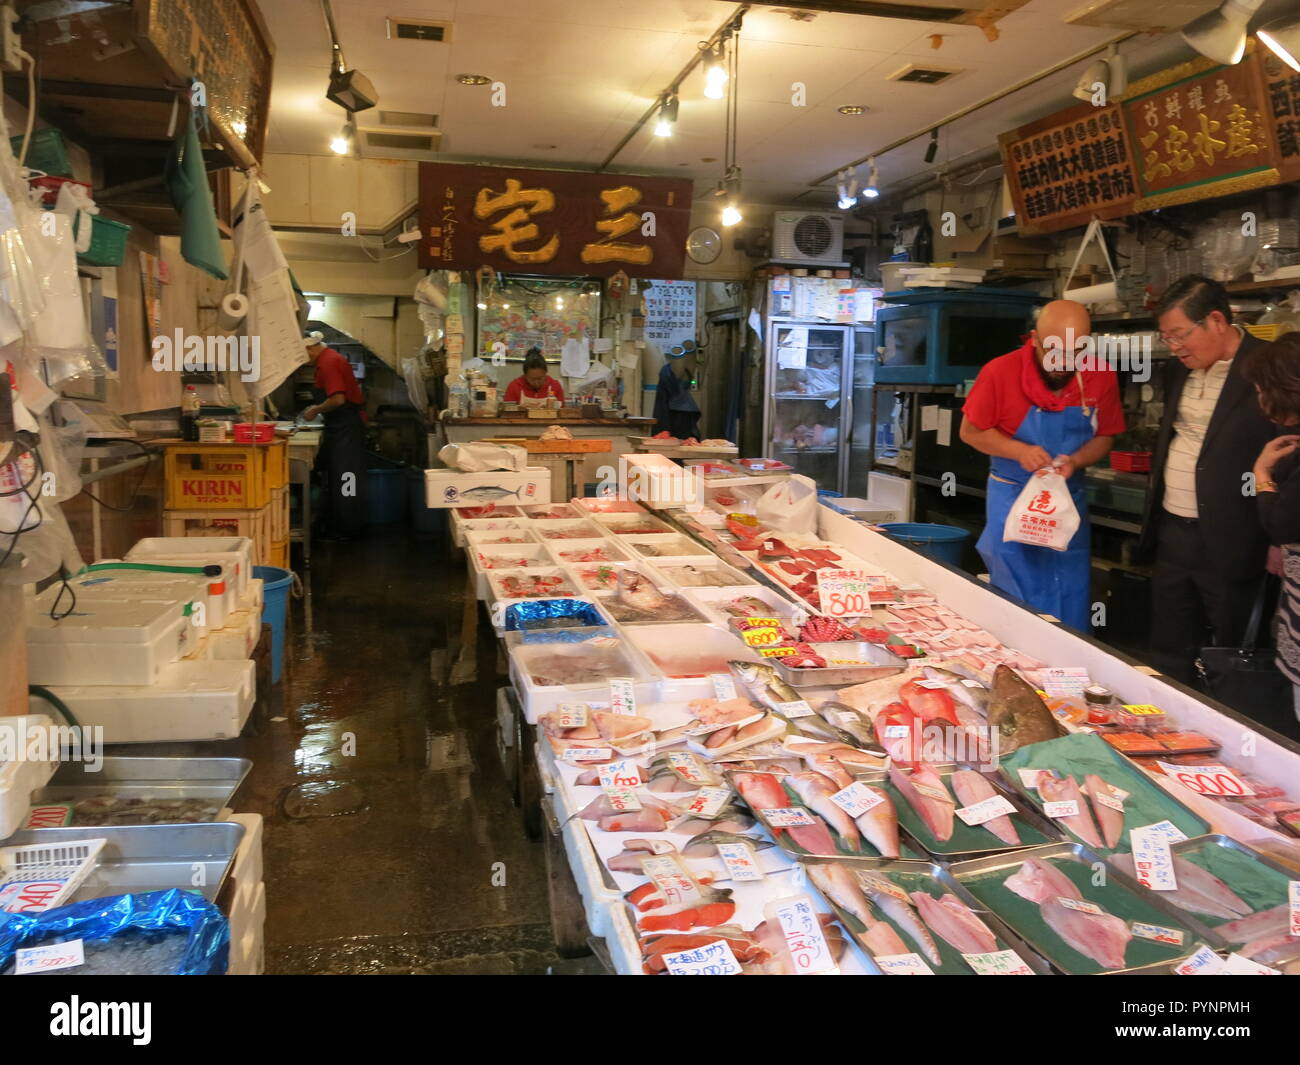 View of the display at a Japanese fish shop in a central Tokyo street market Stock Photo